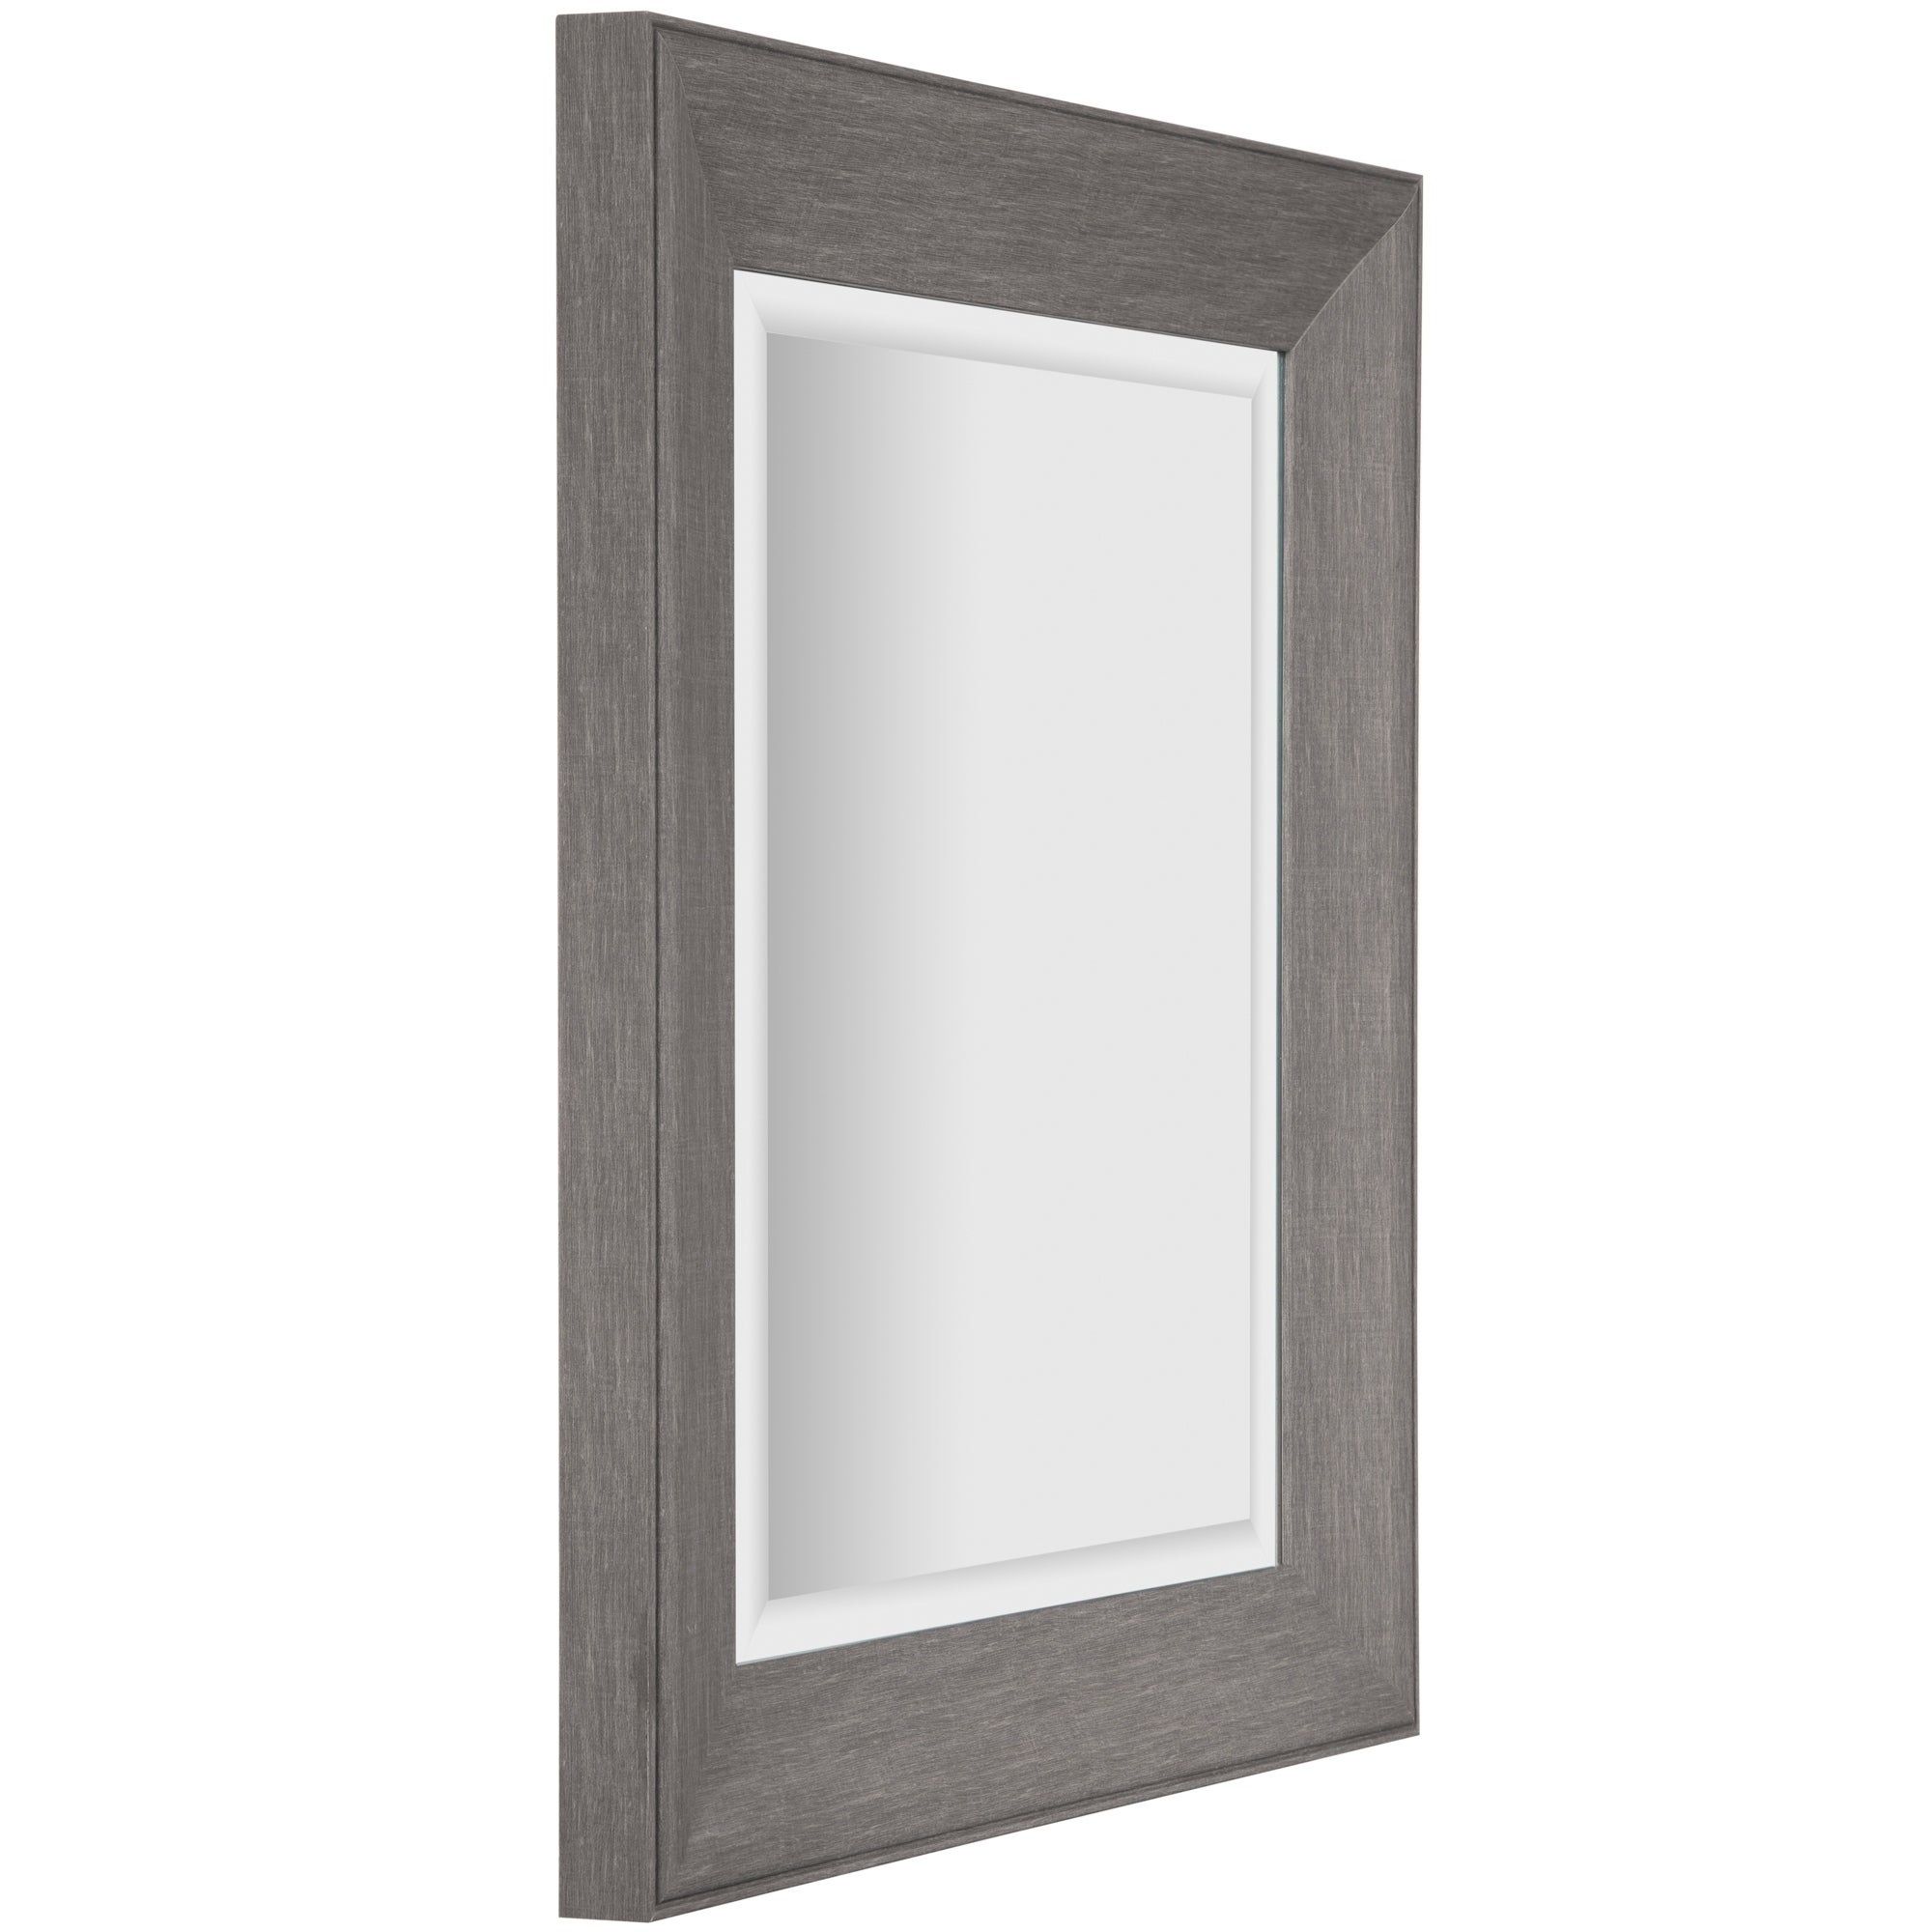 Graywash Woodgrain Framed Beveled Accent Wall Mirror – Grey With Regard To Farmhouse Woodgrain And Leaf Accent Wall Mirrors (View 4 of 20)